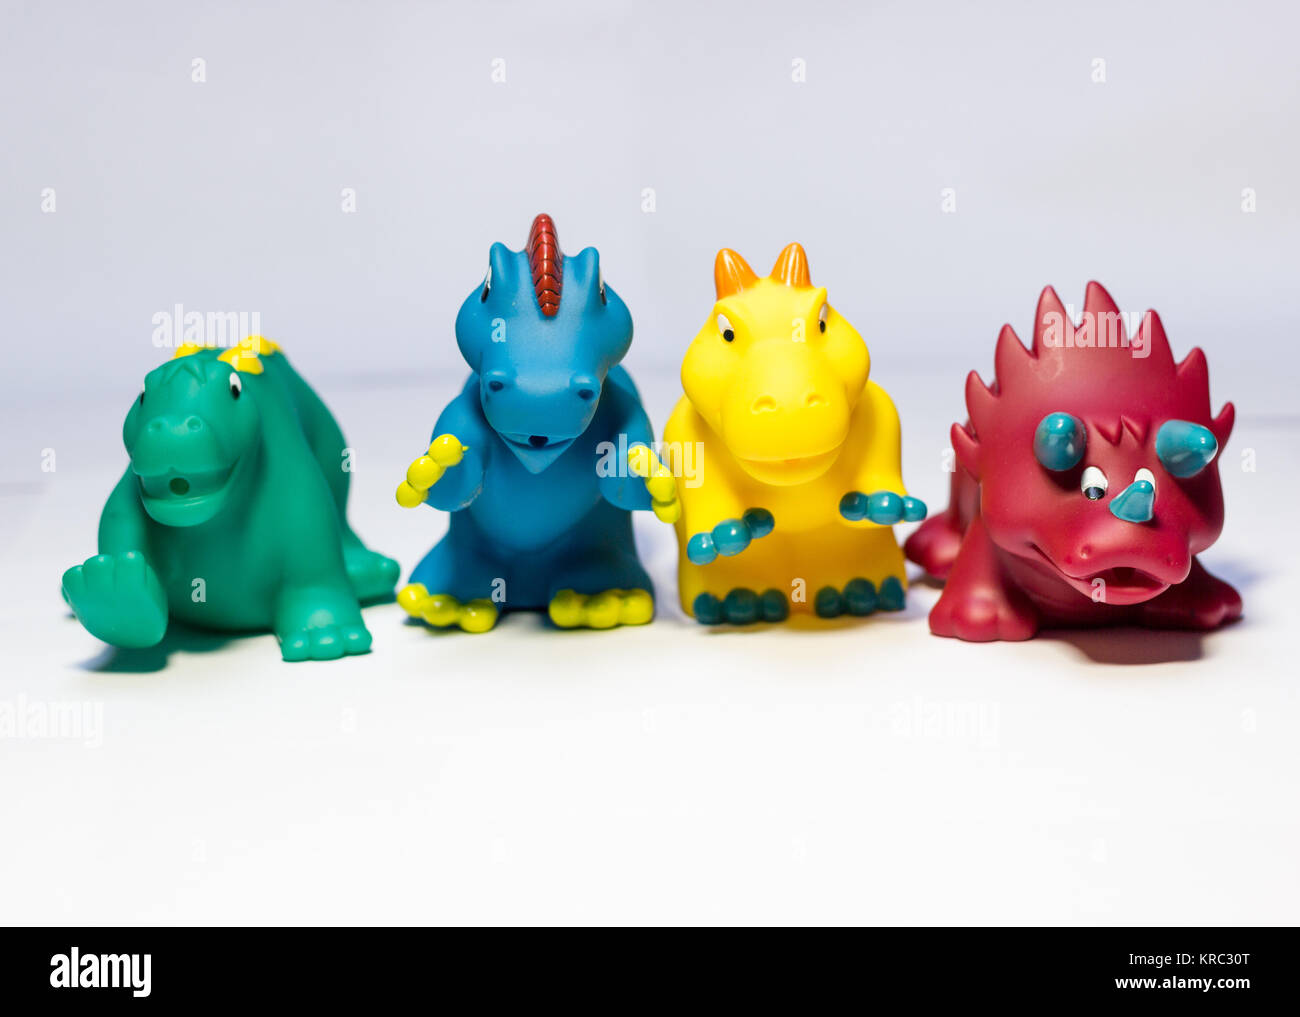 rubber dinosaurs